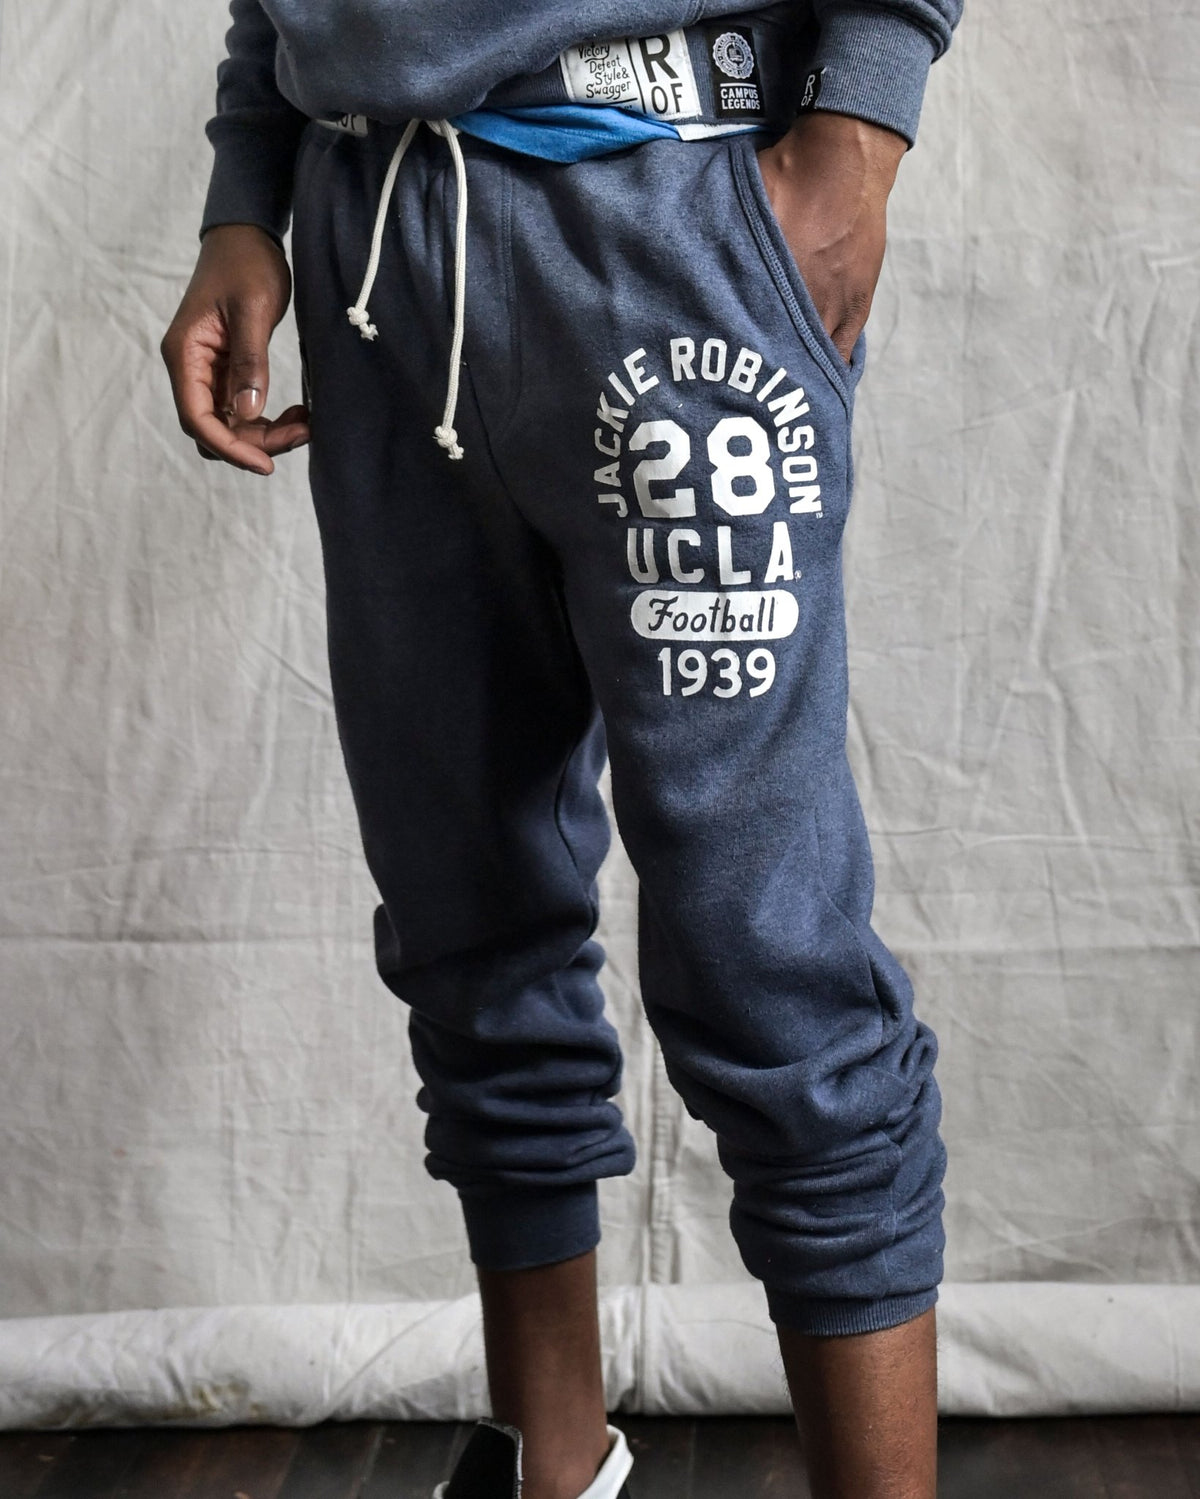 UCLA - Jackie Robinson Football Navy Sweatpants - Roots of Fight Canada